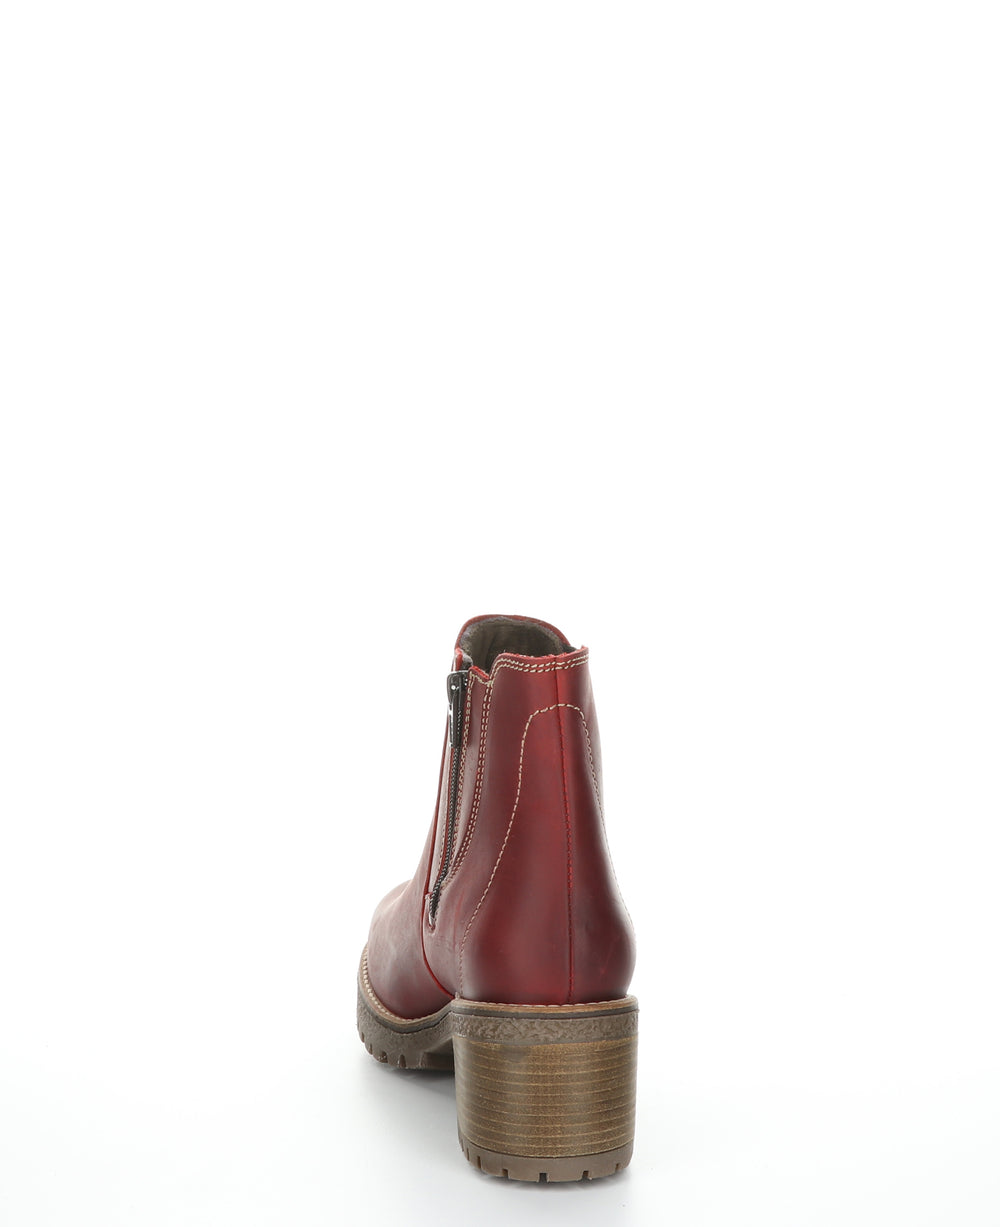 MASS Red Zip Up Ankle Boots|MASS Bottines avec Fermeture Zippée in Rouge